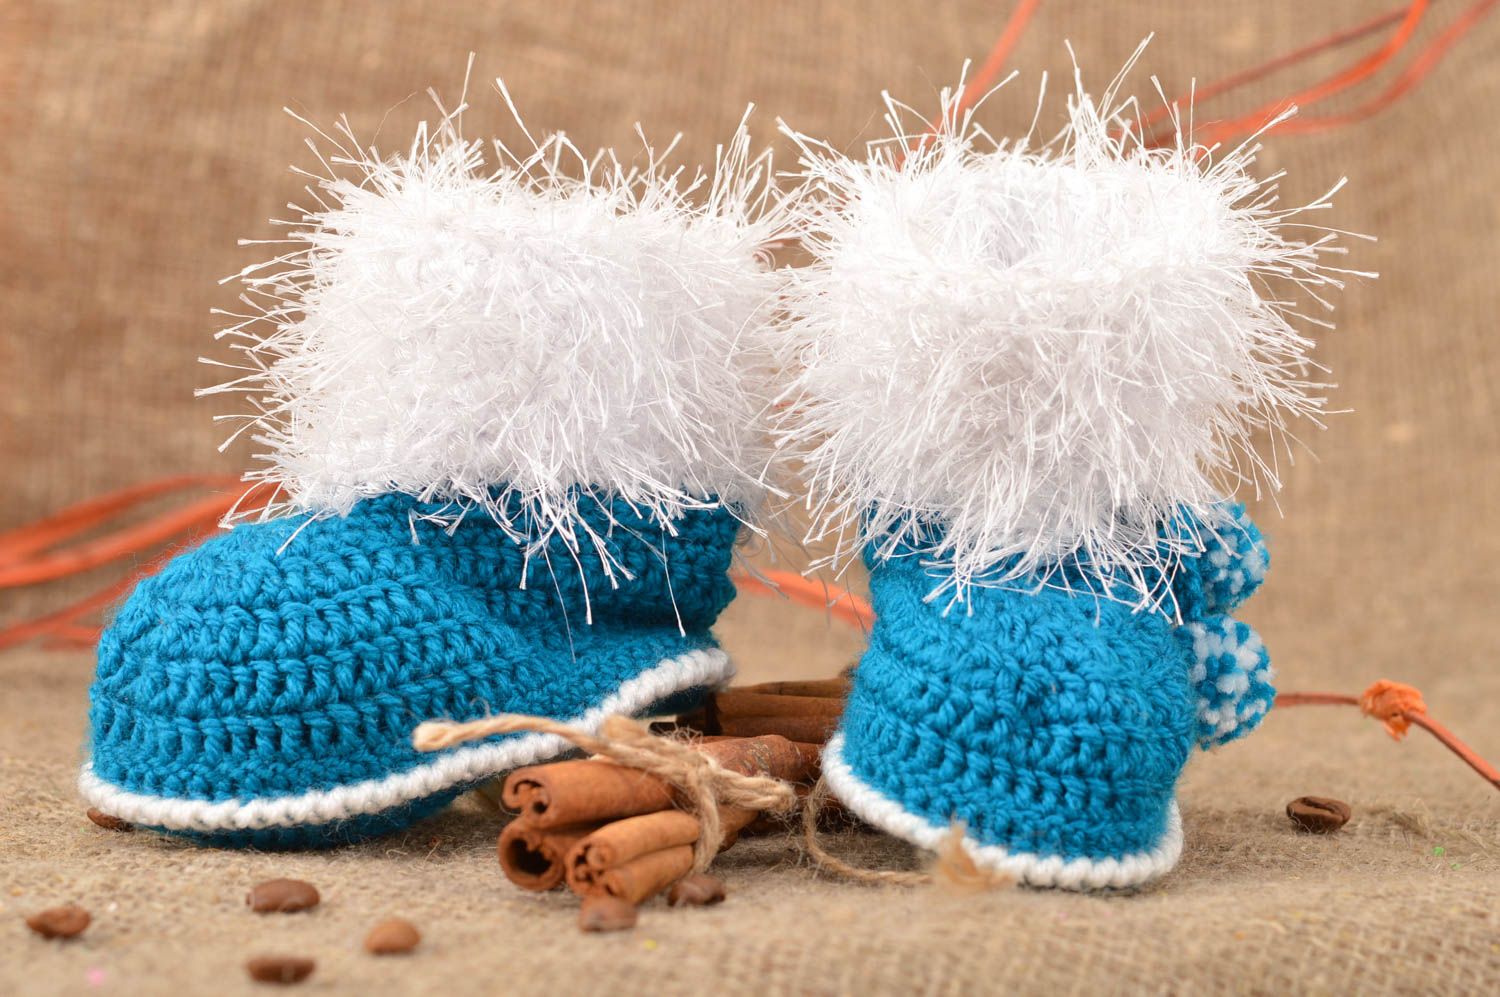 Handmade beautiful blue crocheted baby bootees made of cotton for boys photo 1